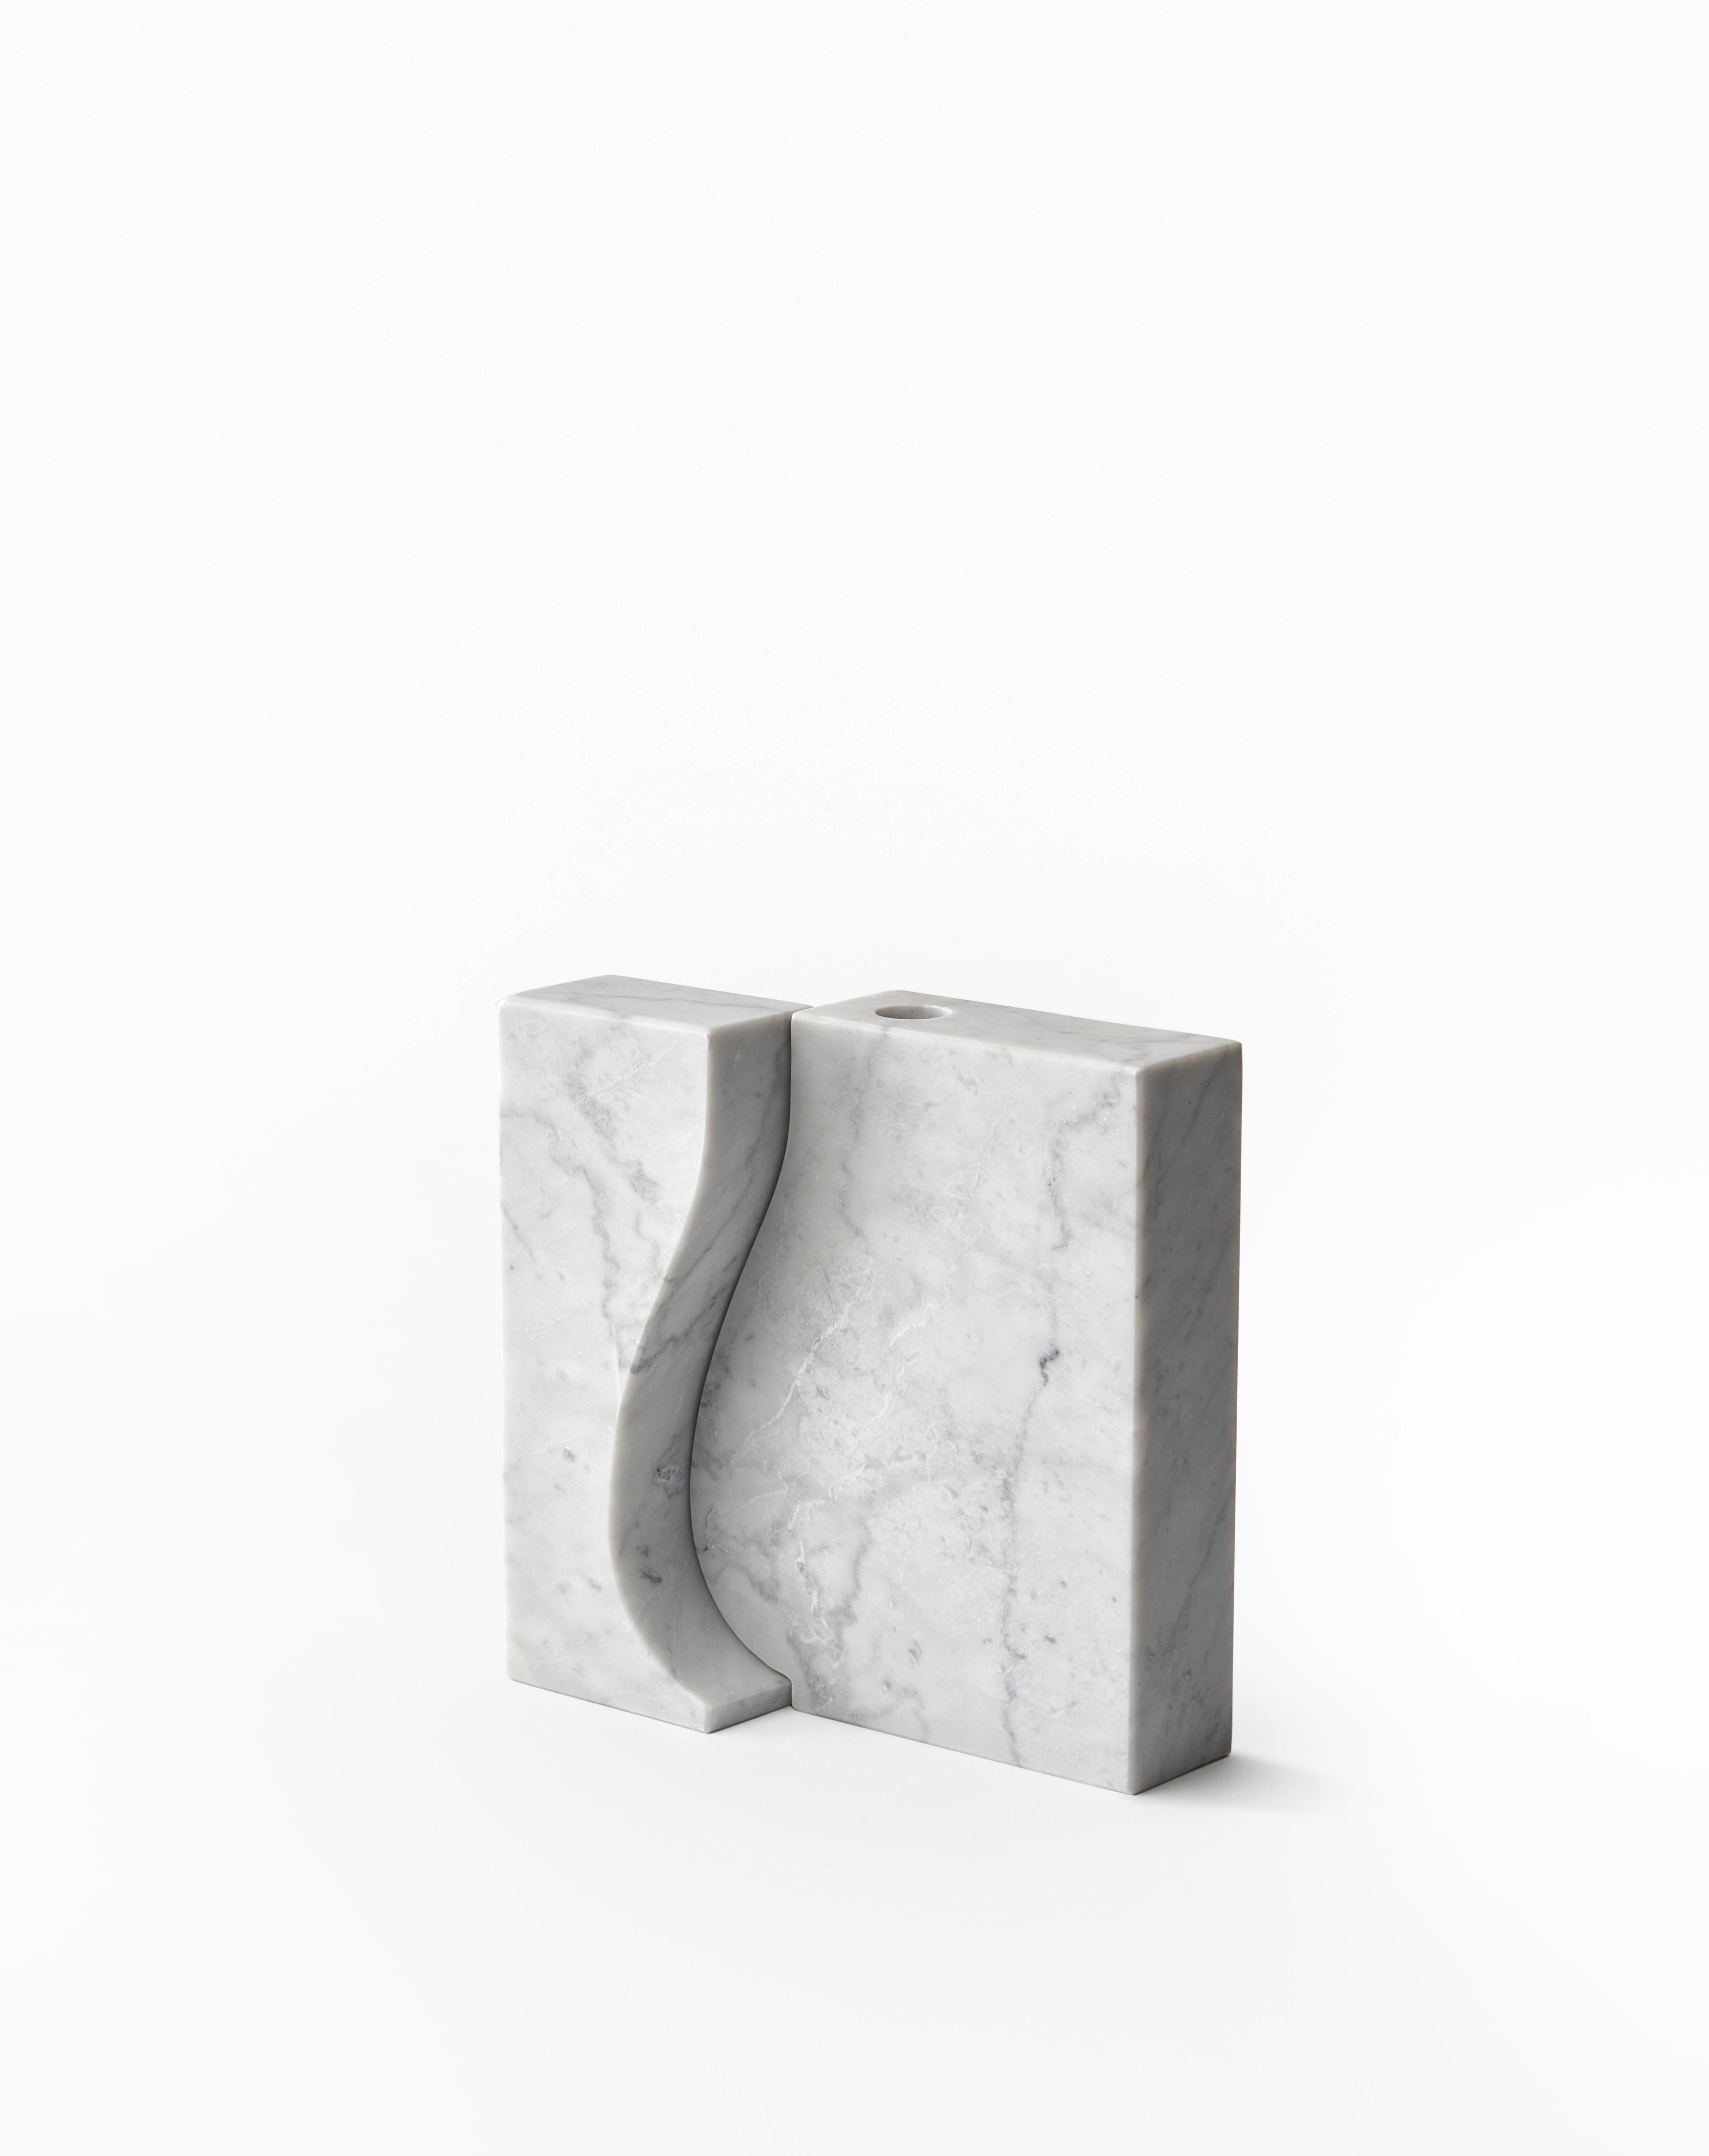 Small Recisi marble vase - Moreno Ratti
Dimensions: D 5 x W 20 x H 20 cm
Materials: White Carrara marble.
Available in other size and marble.

The memory of a children's game, like play with simple shape cut on paper.
The magic of the